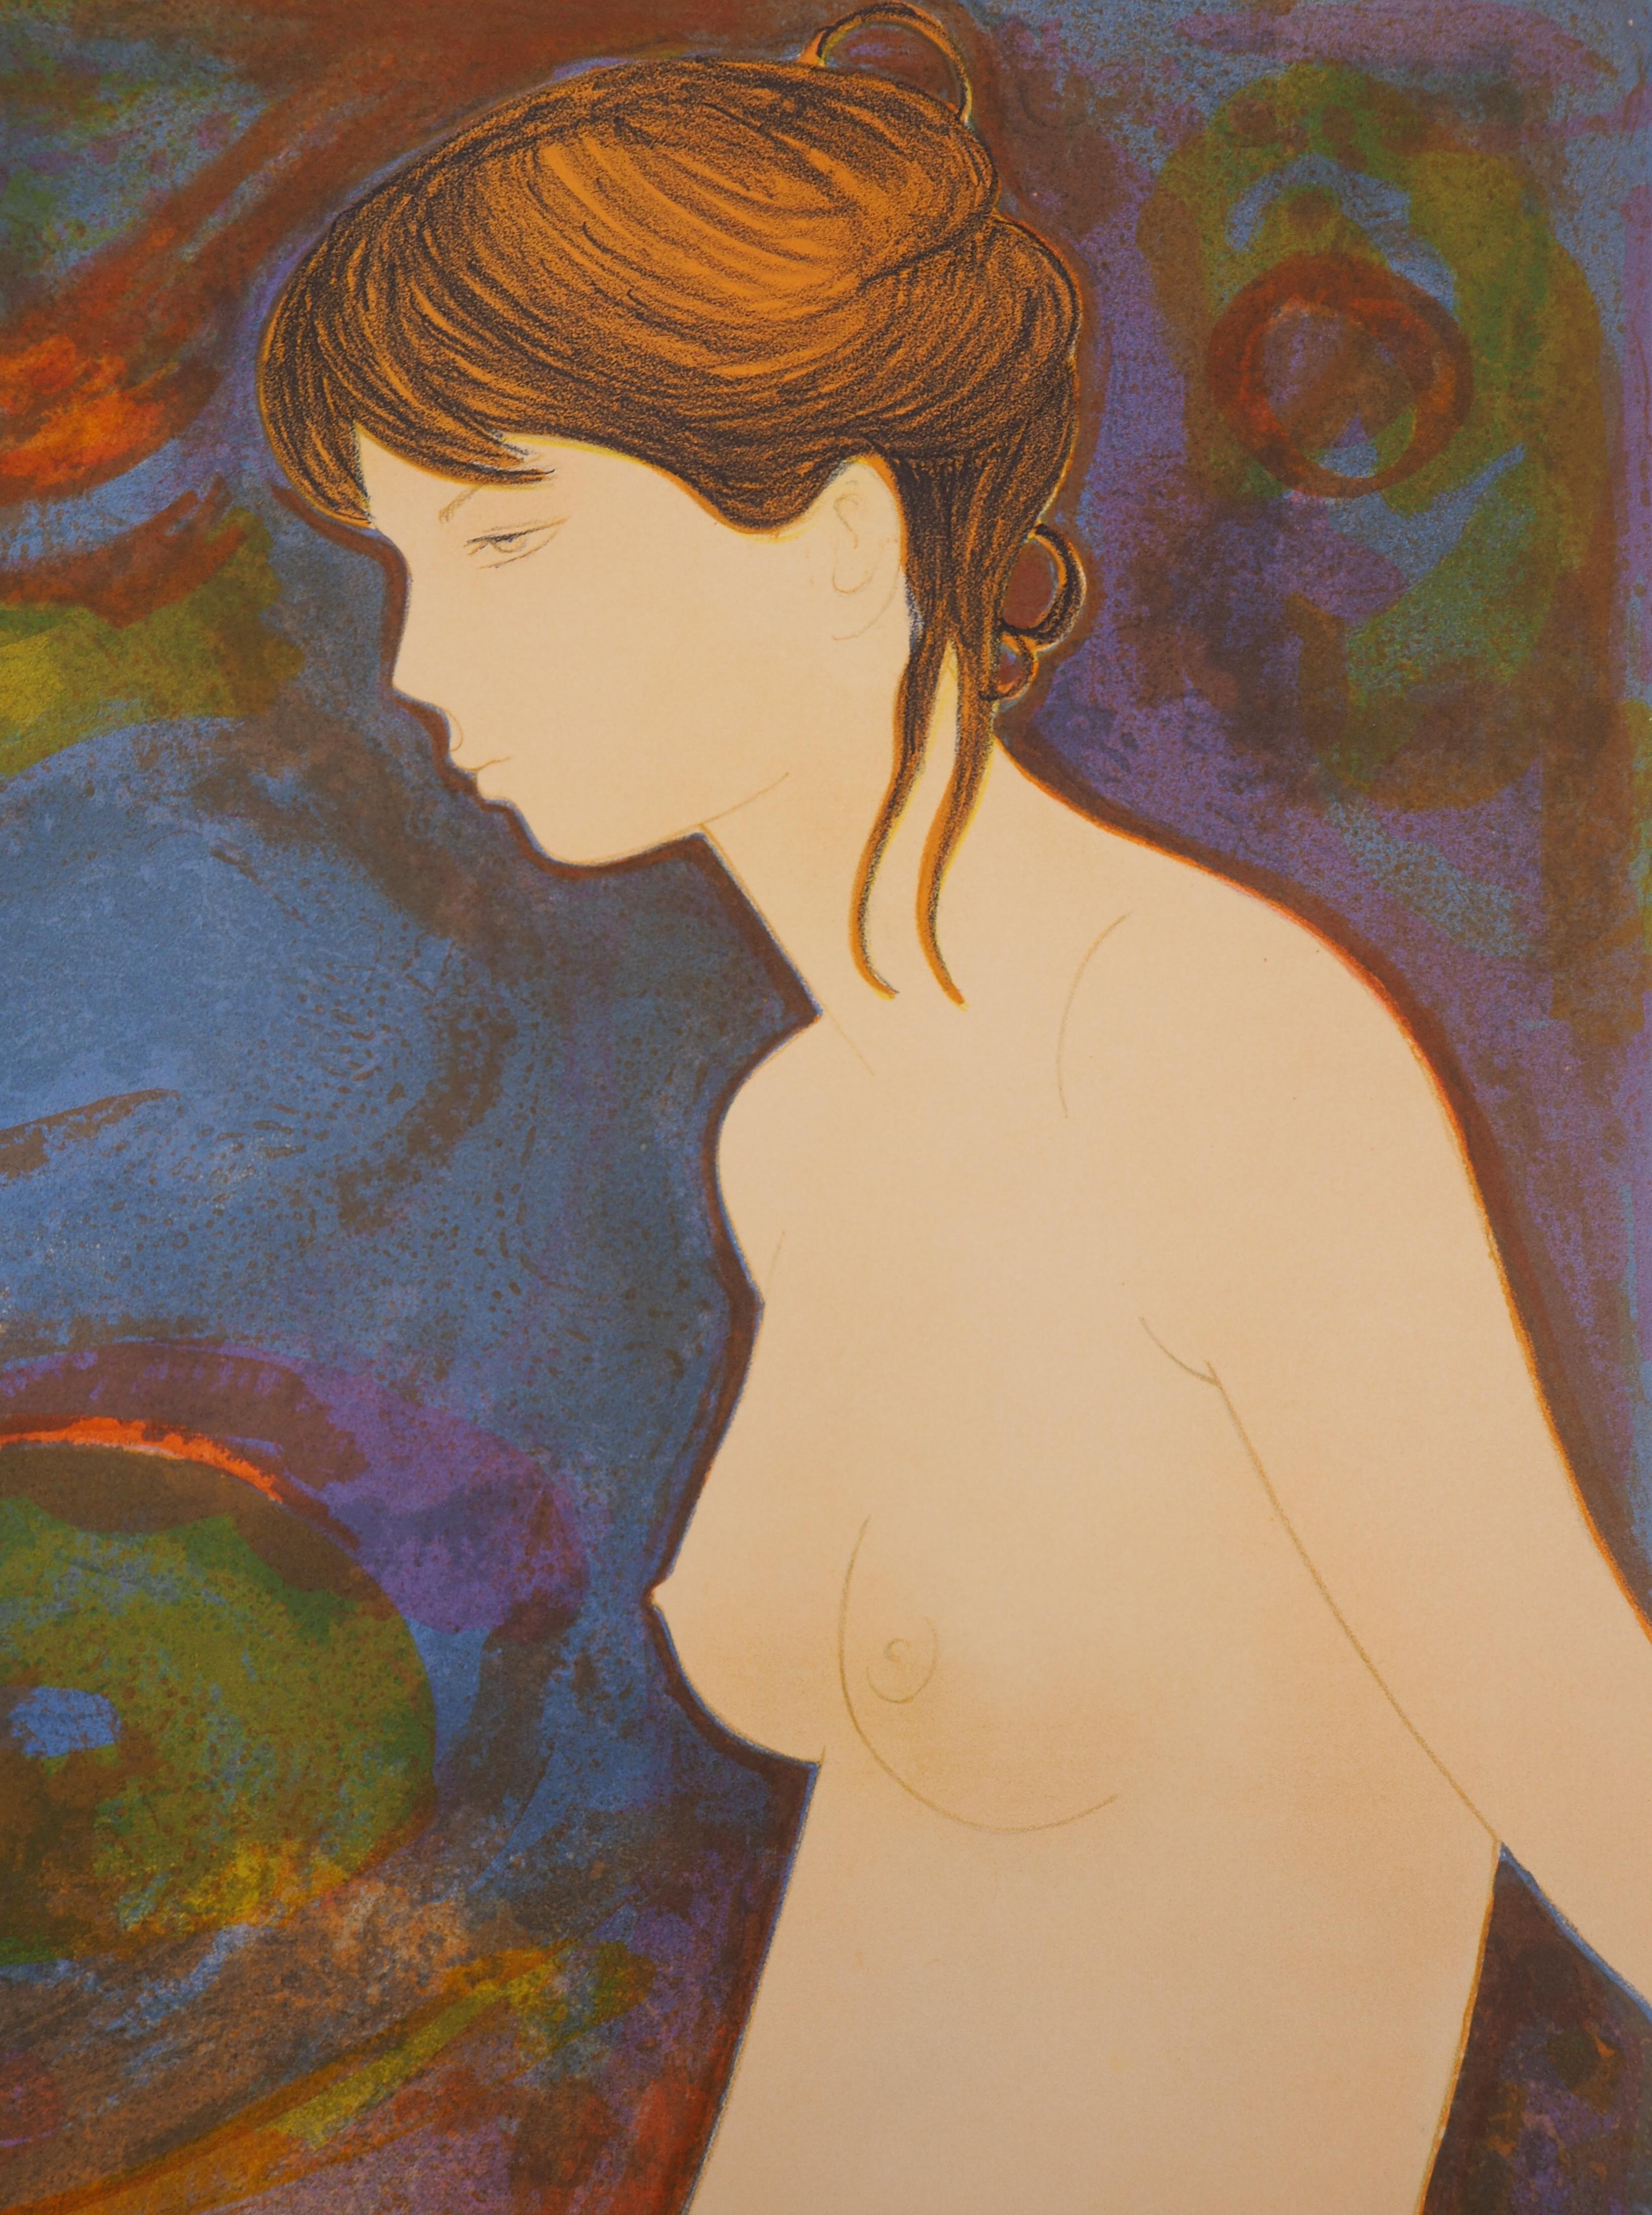 Beauty in a Dream - Original lithograph, Handsigned and Numbered /100 - Brown Nude Print by Alain Bonnefoit